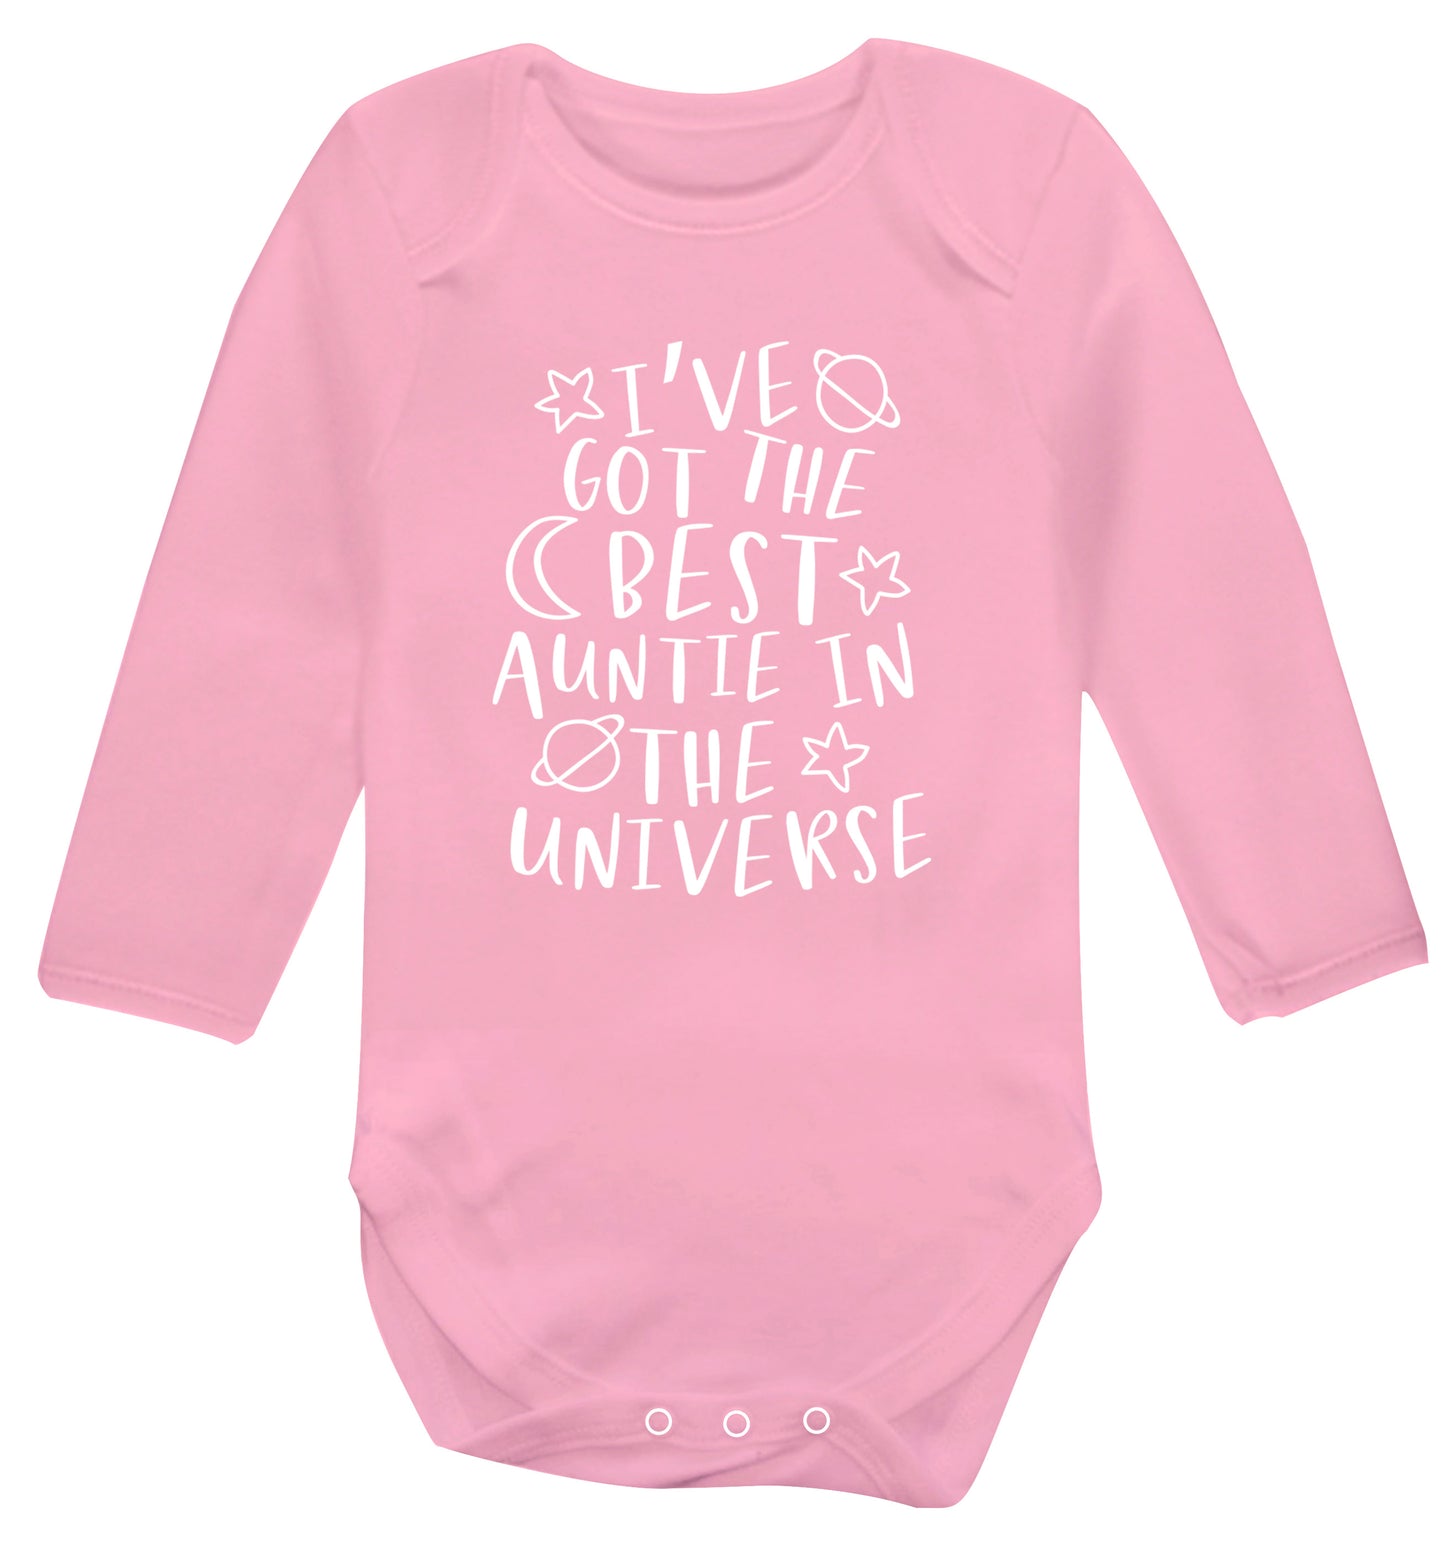 I've got the best auntie in the universe Baby Vest long sleeved pale pink 6-12 months